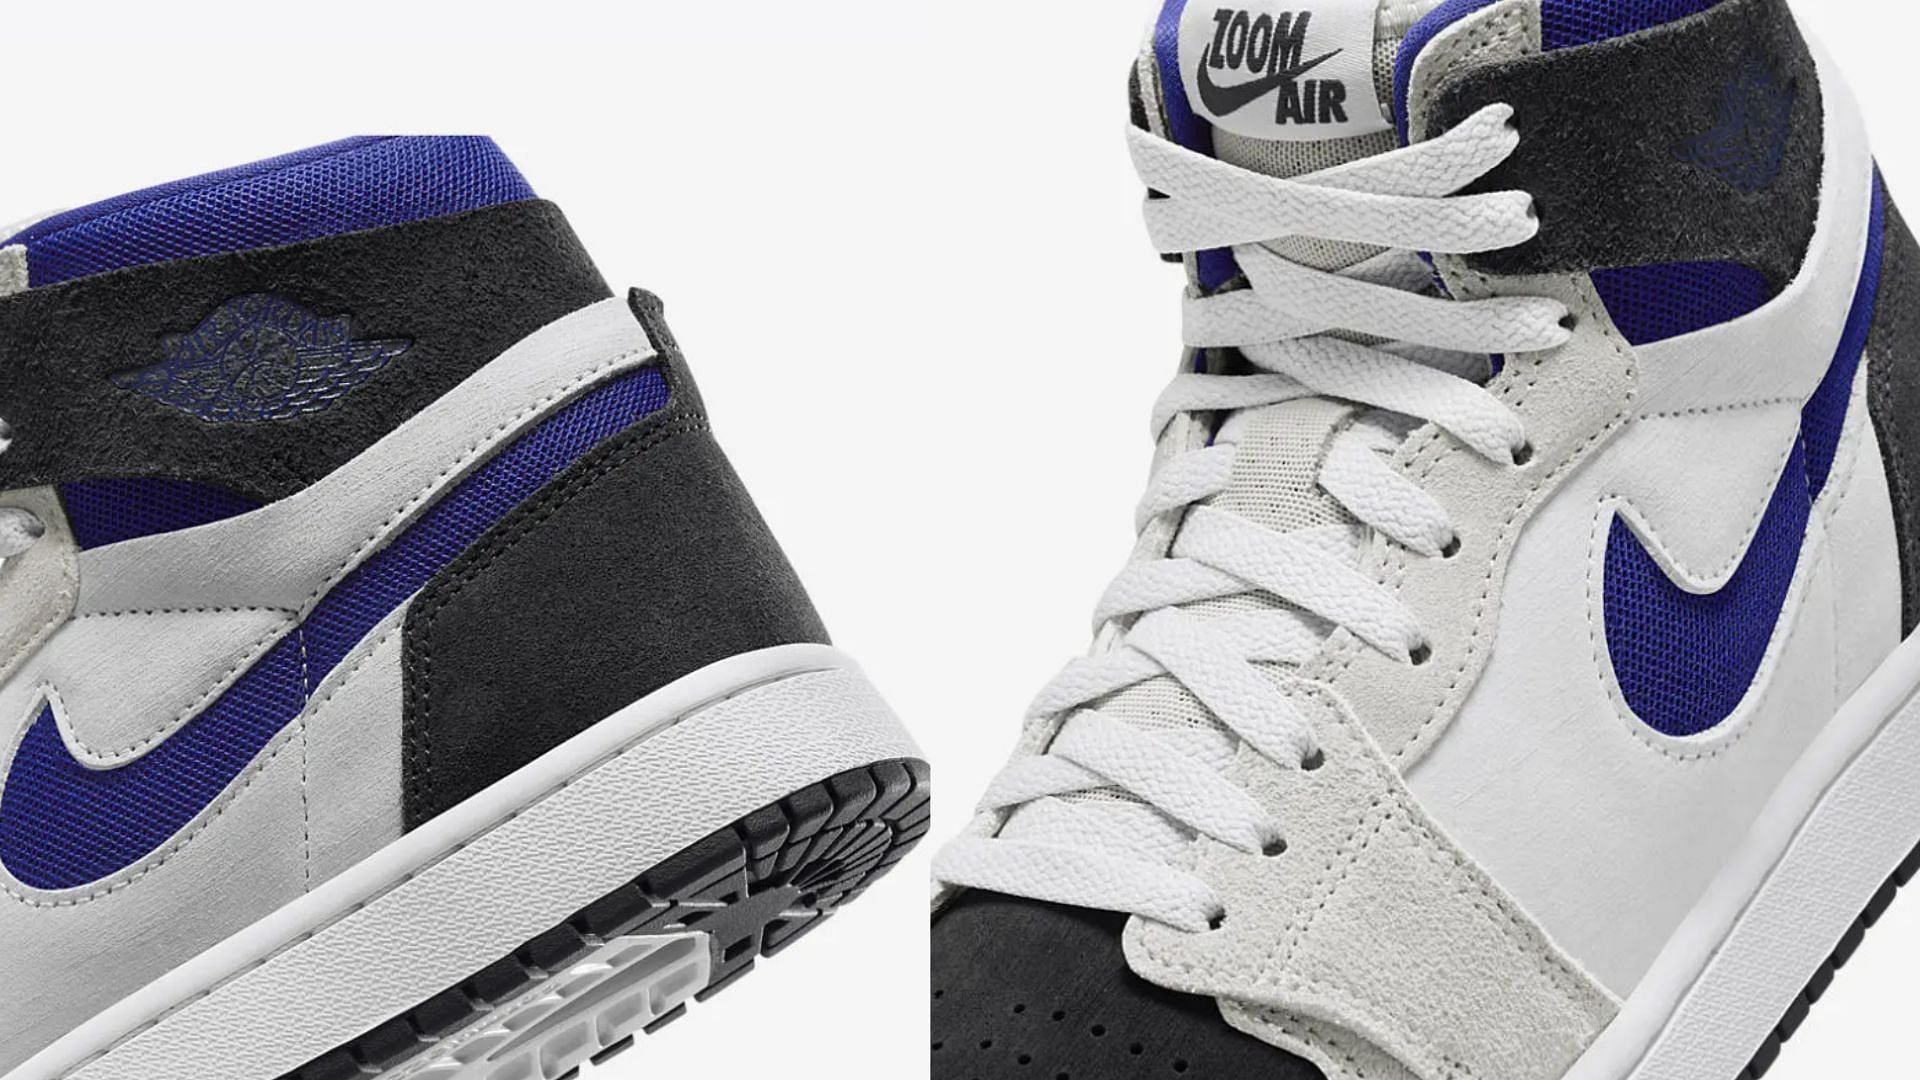 A closer look at the heels and tongues of these Air Jordan 1 High CMFT 2 Concord shoes (Image via YouTube/@ragnoupdates)